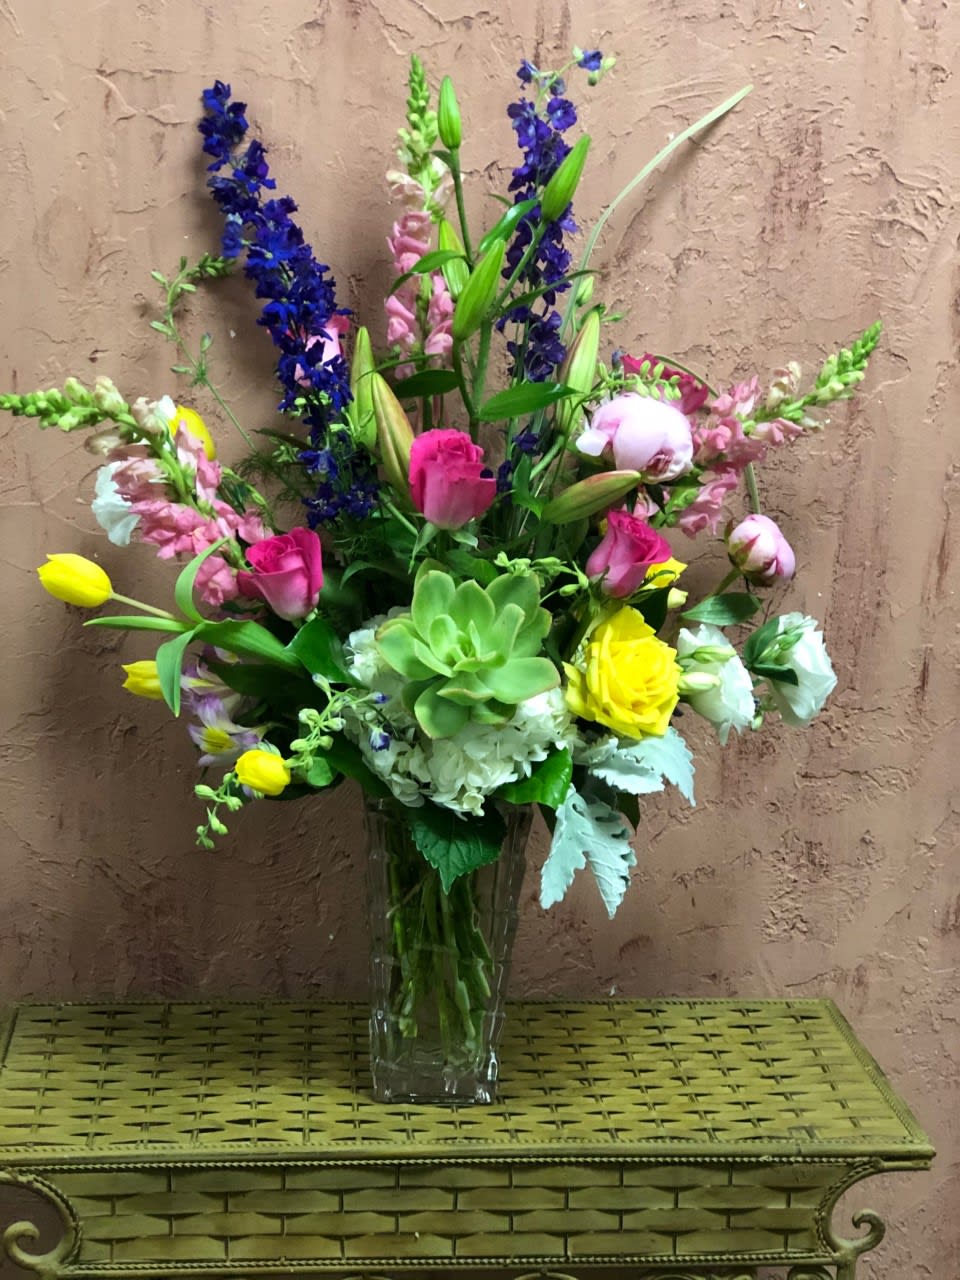 June Bloom - Type of Flowers: Pink Snapdragon, Purple Larkspur, Pink Peonies (seasonal), Pink Stargazers, Yellow Roses, Pink Roses, White Hydrangeas, White Lisianthus, Yellow Tulips, Green Succulent, and Dusty Miller in a short vase. Availability: Seasonal  Peonies available November-March, May-June.  Substitute Available: Yes Design View: Symmetric Front Facing View Photo shown: Regular